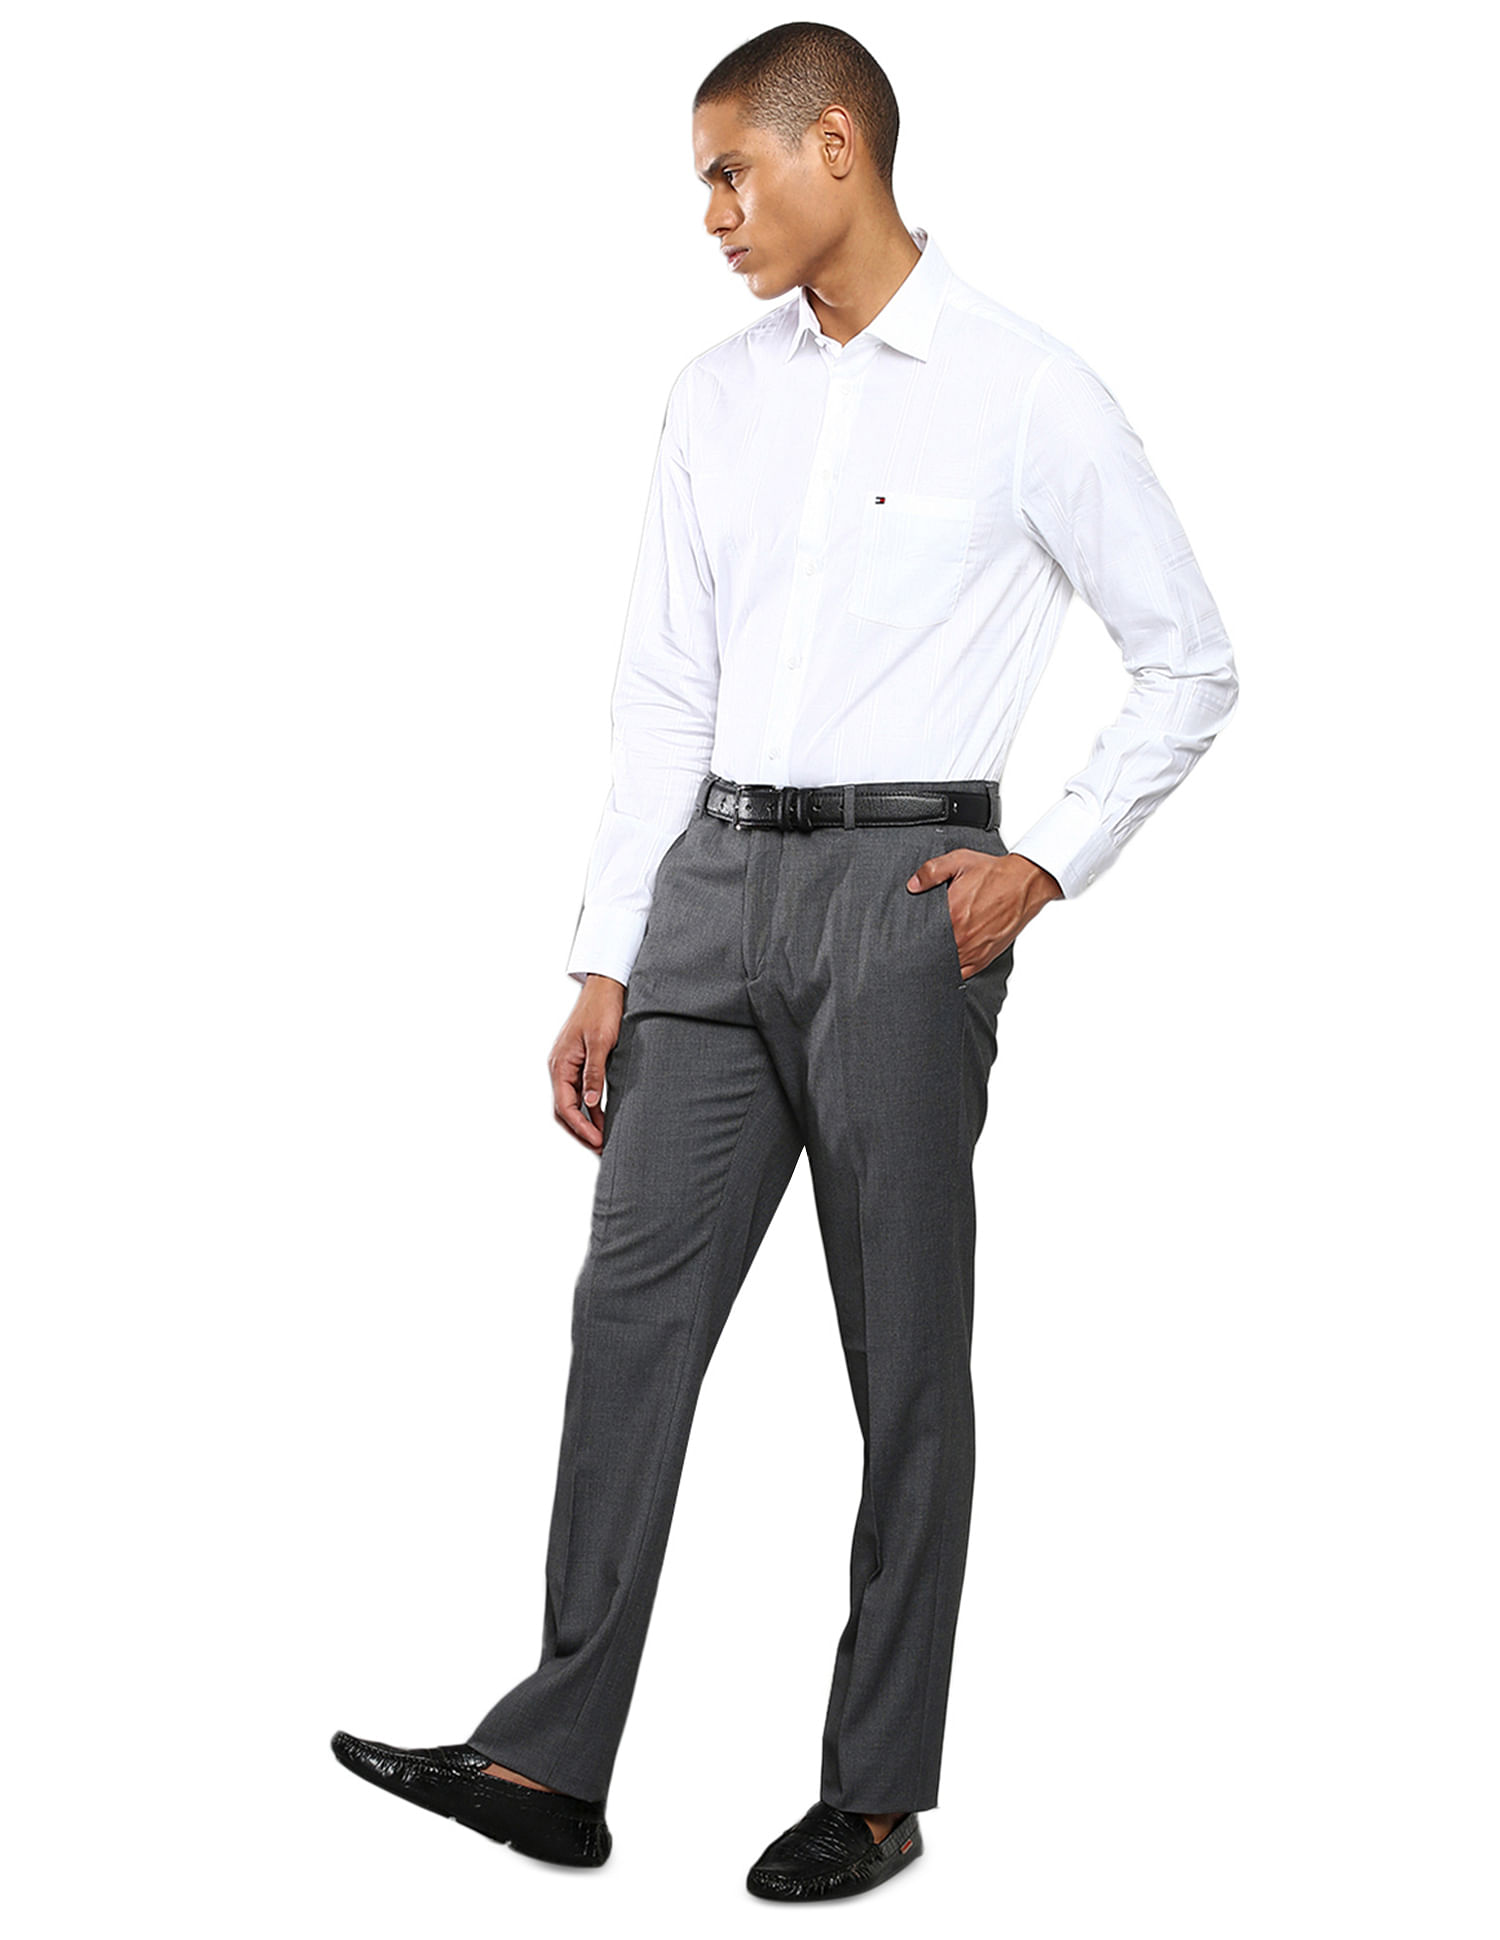 Decible Polyster Blend FormalTrousers For Man |formal pants light grey |  light grey pant | trousers for men | office pant |